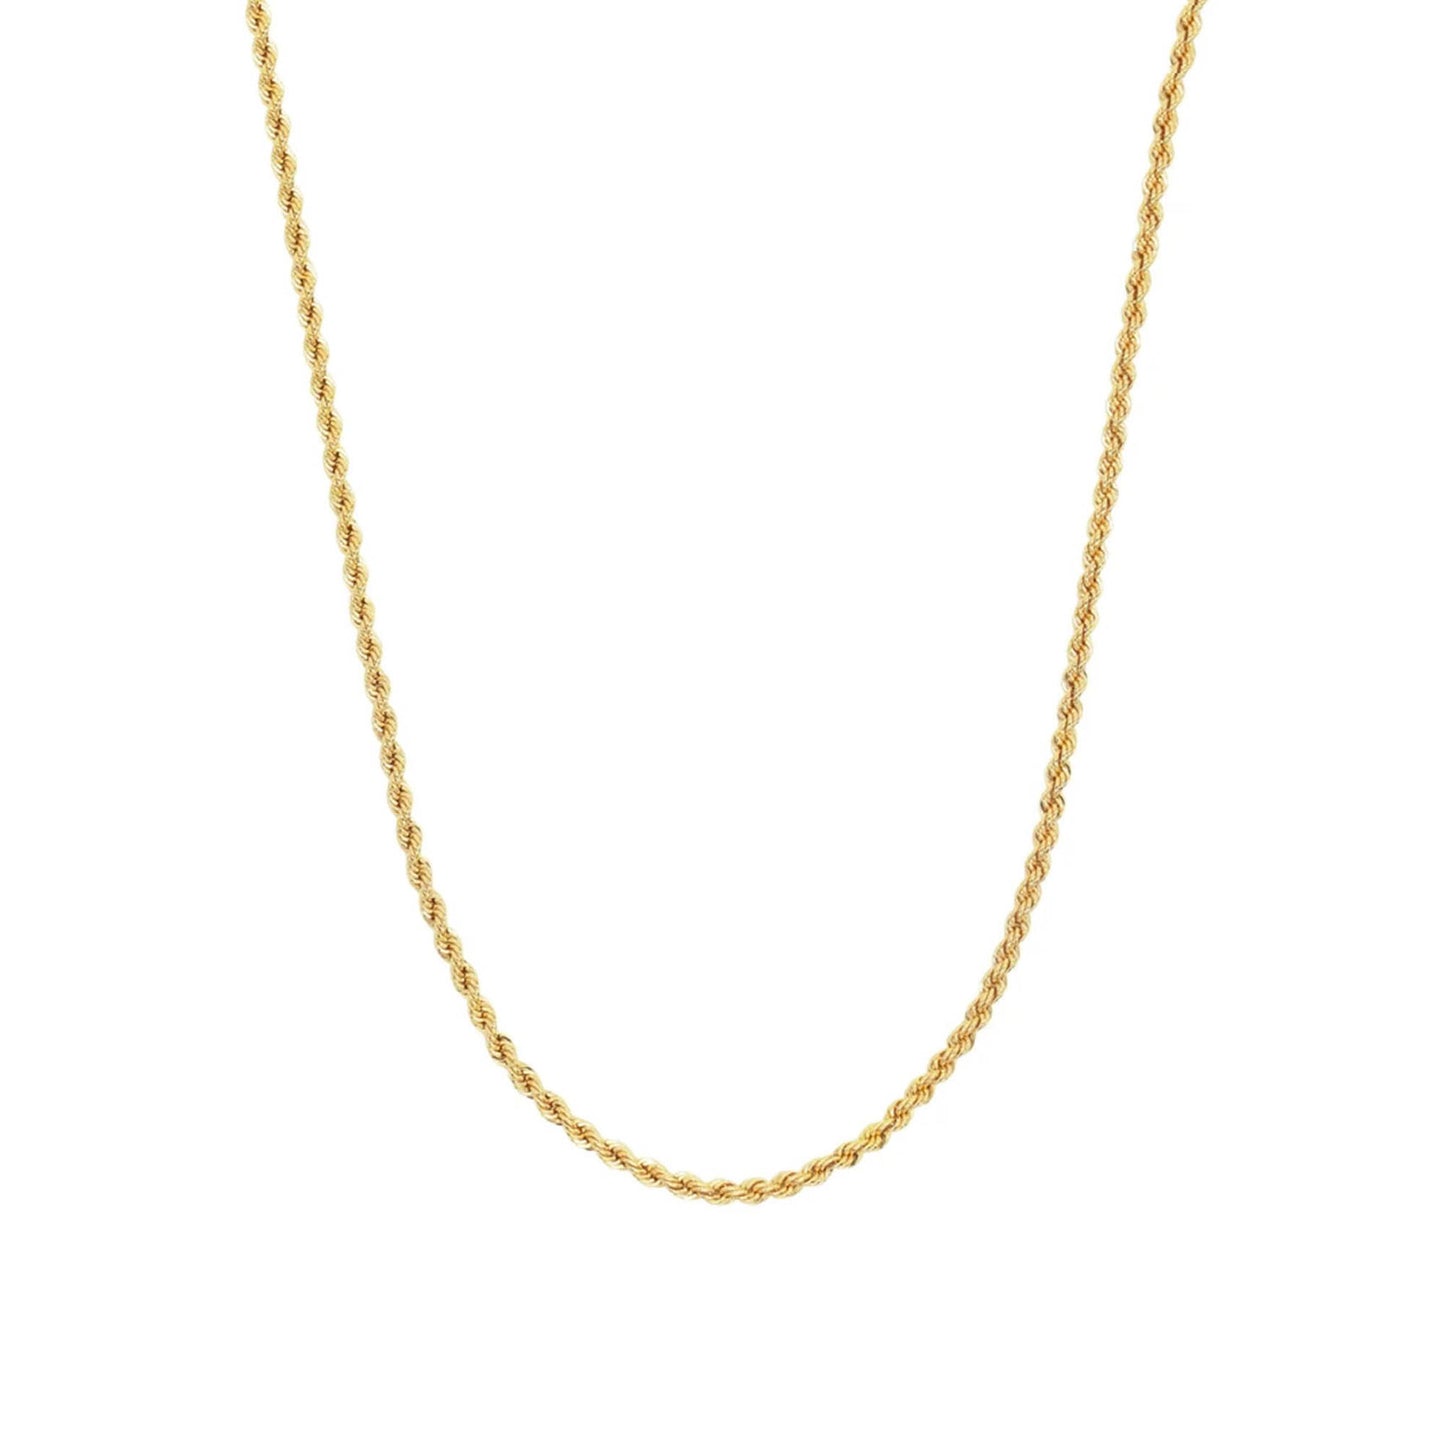 9K GOLD 18 INCH FINE ROPE CHAIN NECKLACE